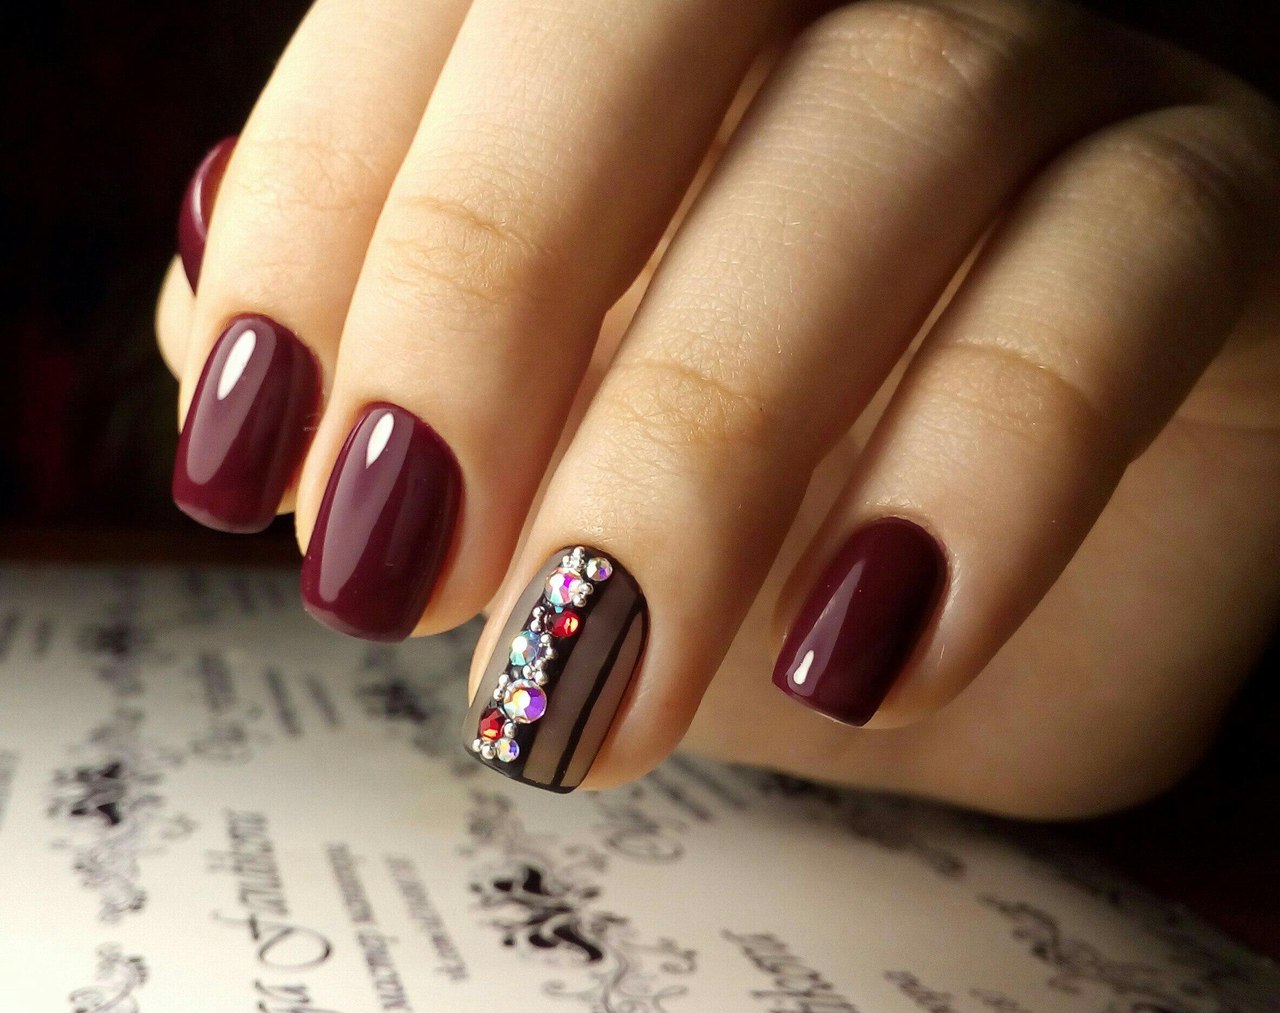 1. Nail Art House Photo Gallery - wide 9